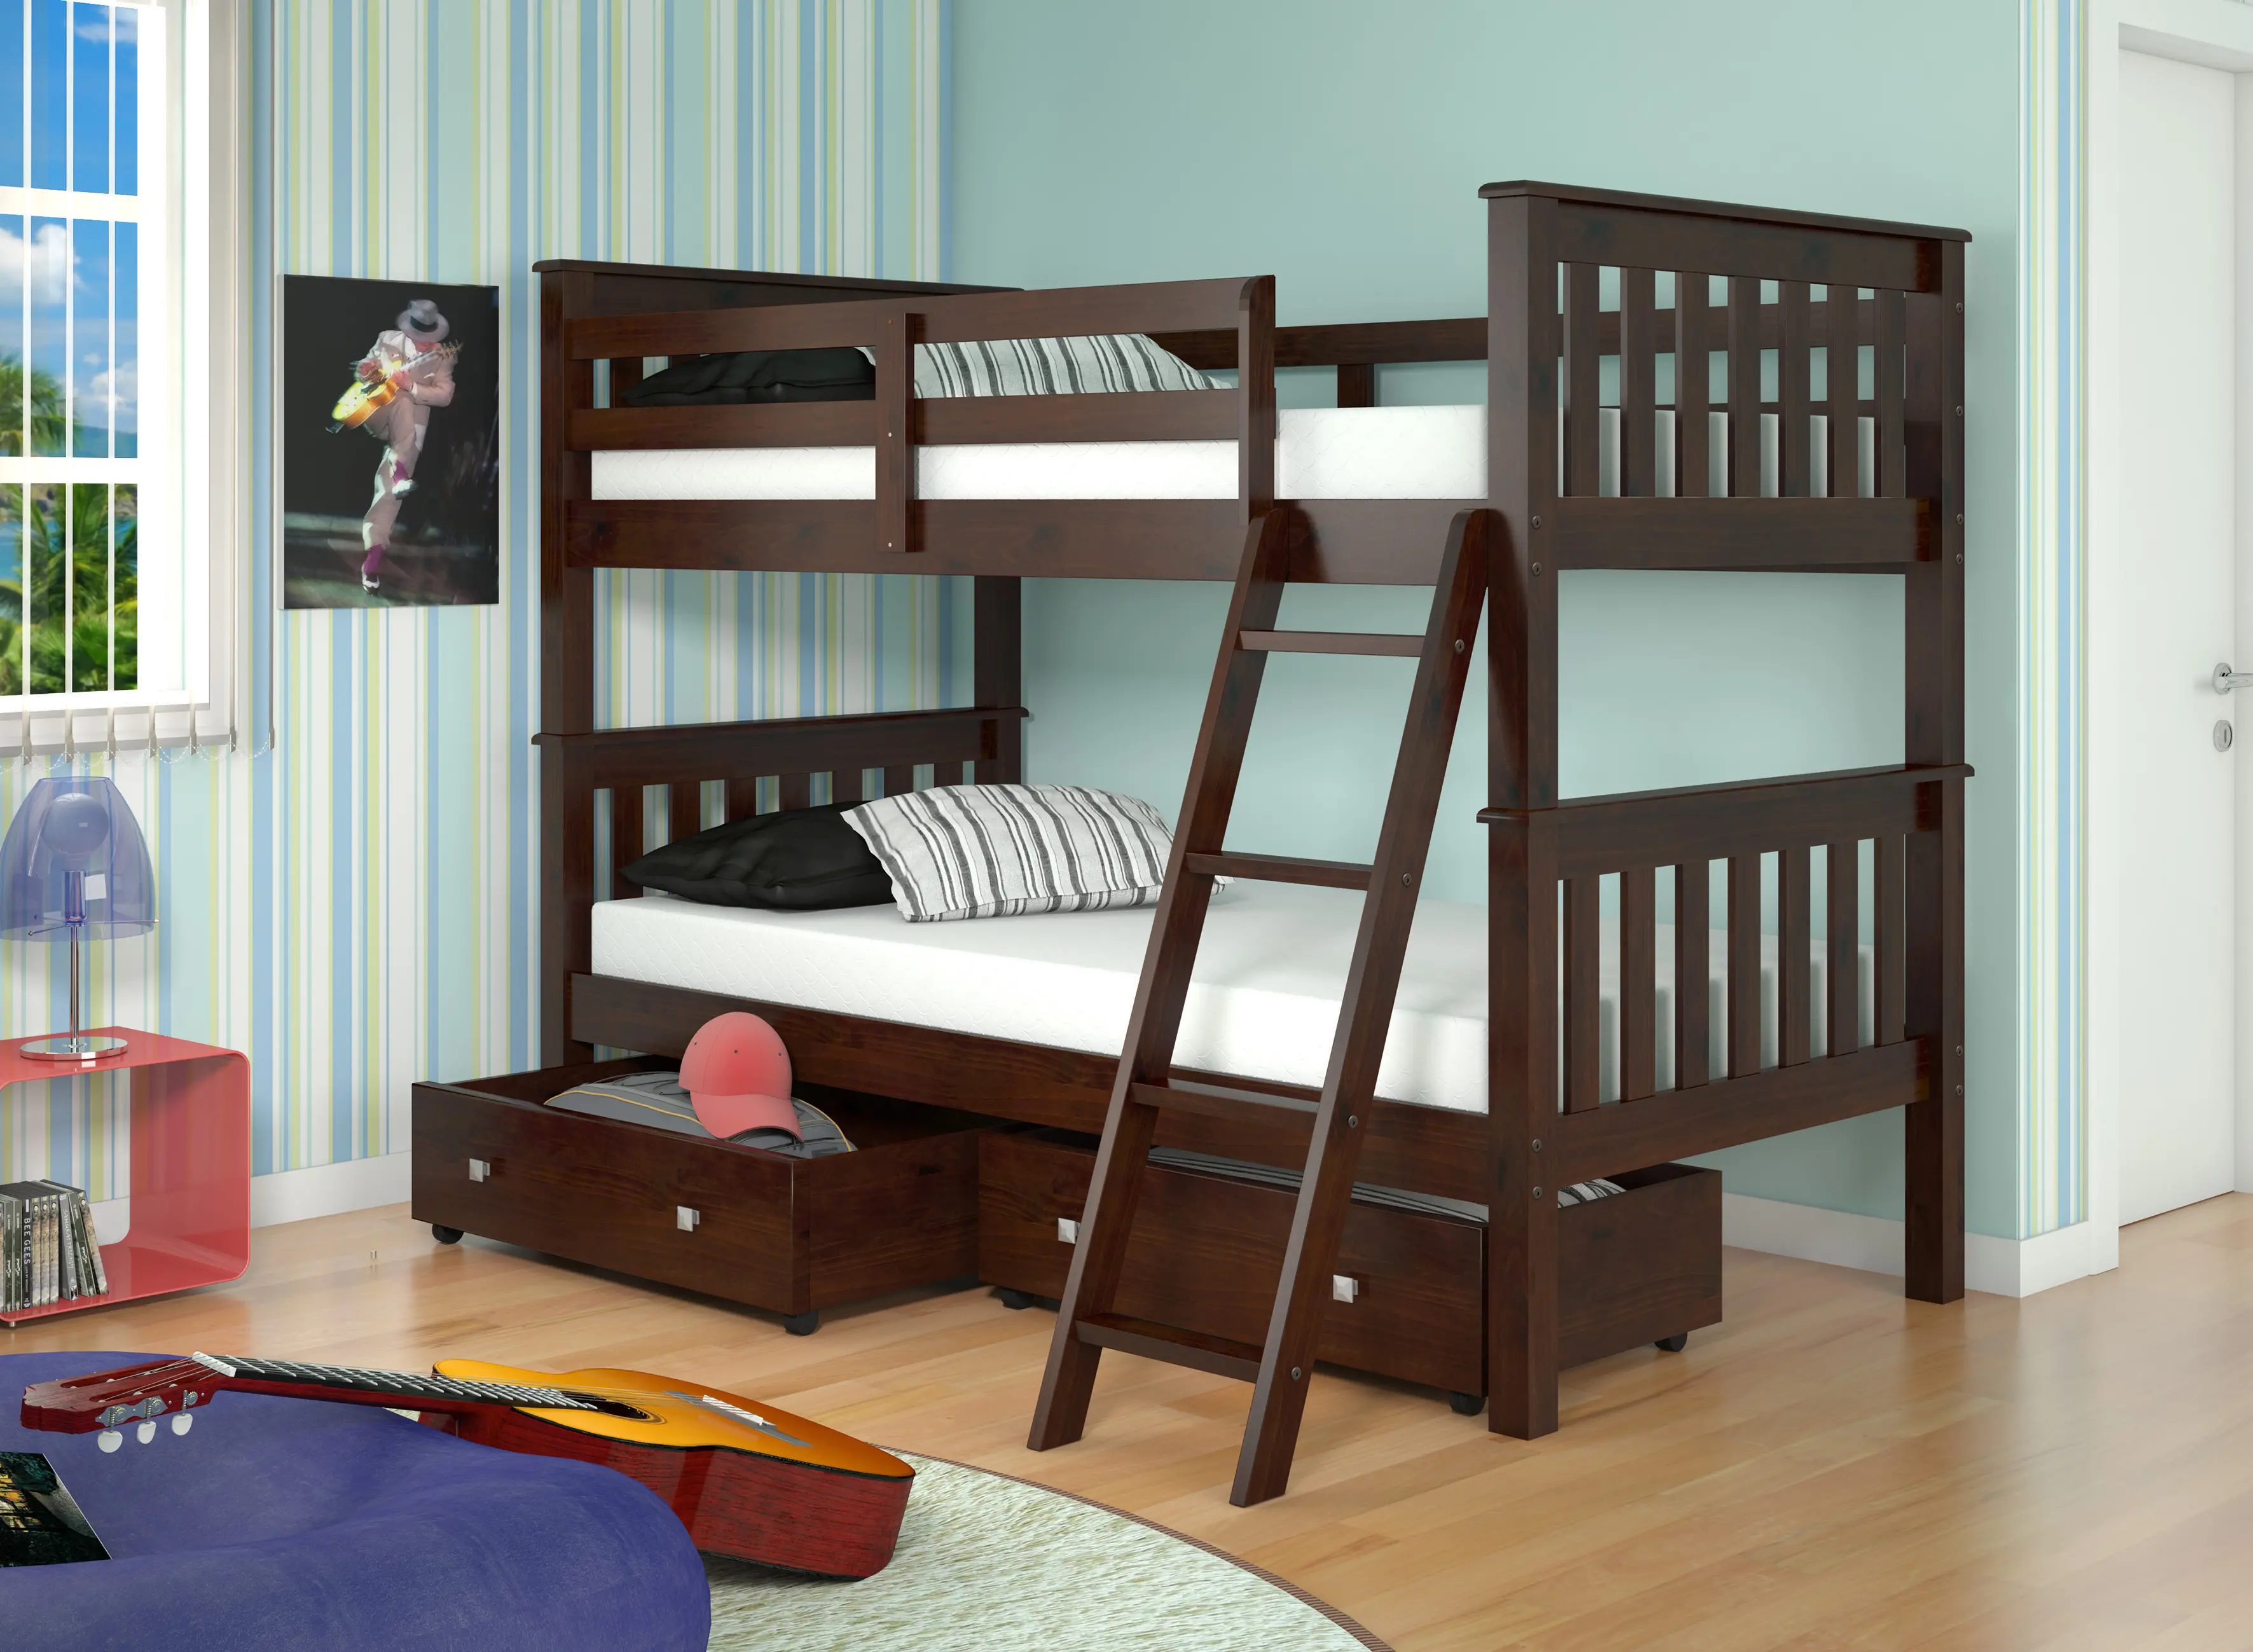 120-1-TTCPTT505-CP Mission Dark Brown Twin-over-Twin Bunk Bed with Dr sku 120-1-TTCPTT505-CP